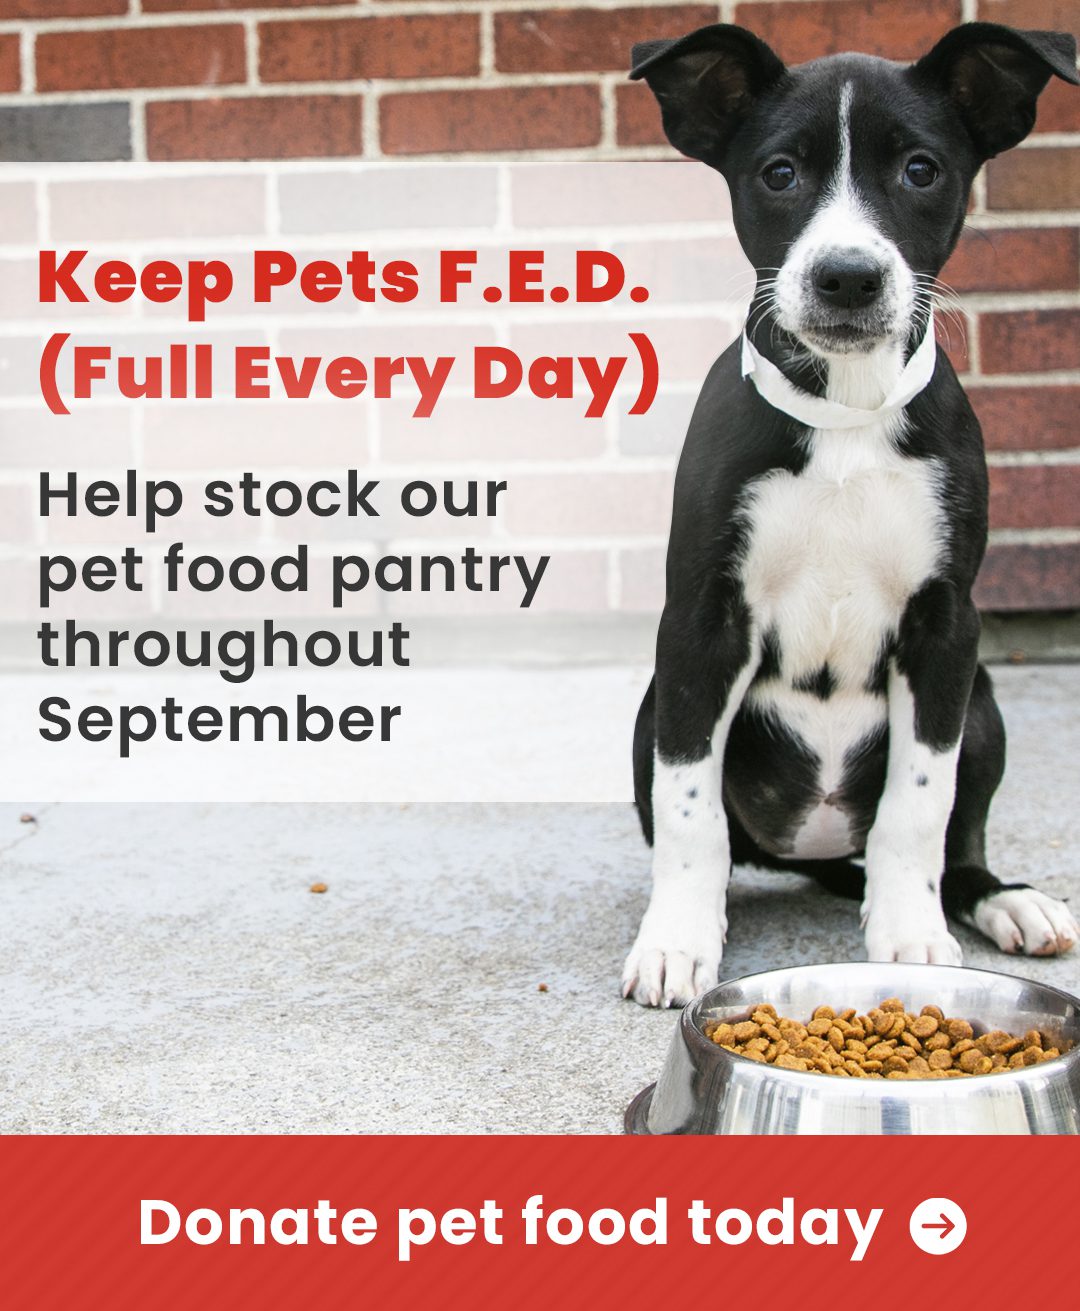 Puppy in front of food bowl graphic